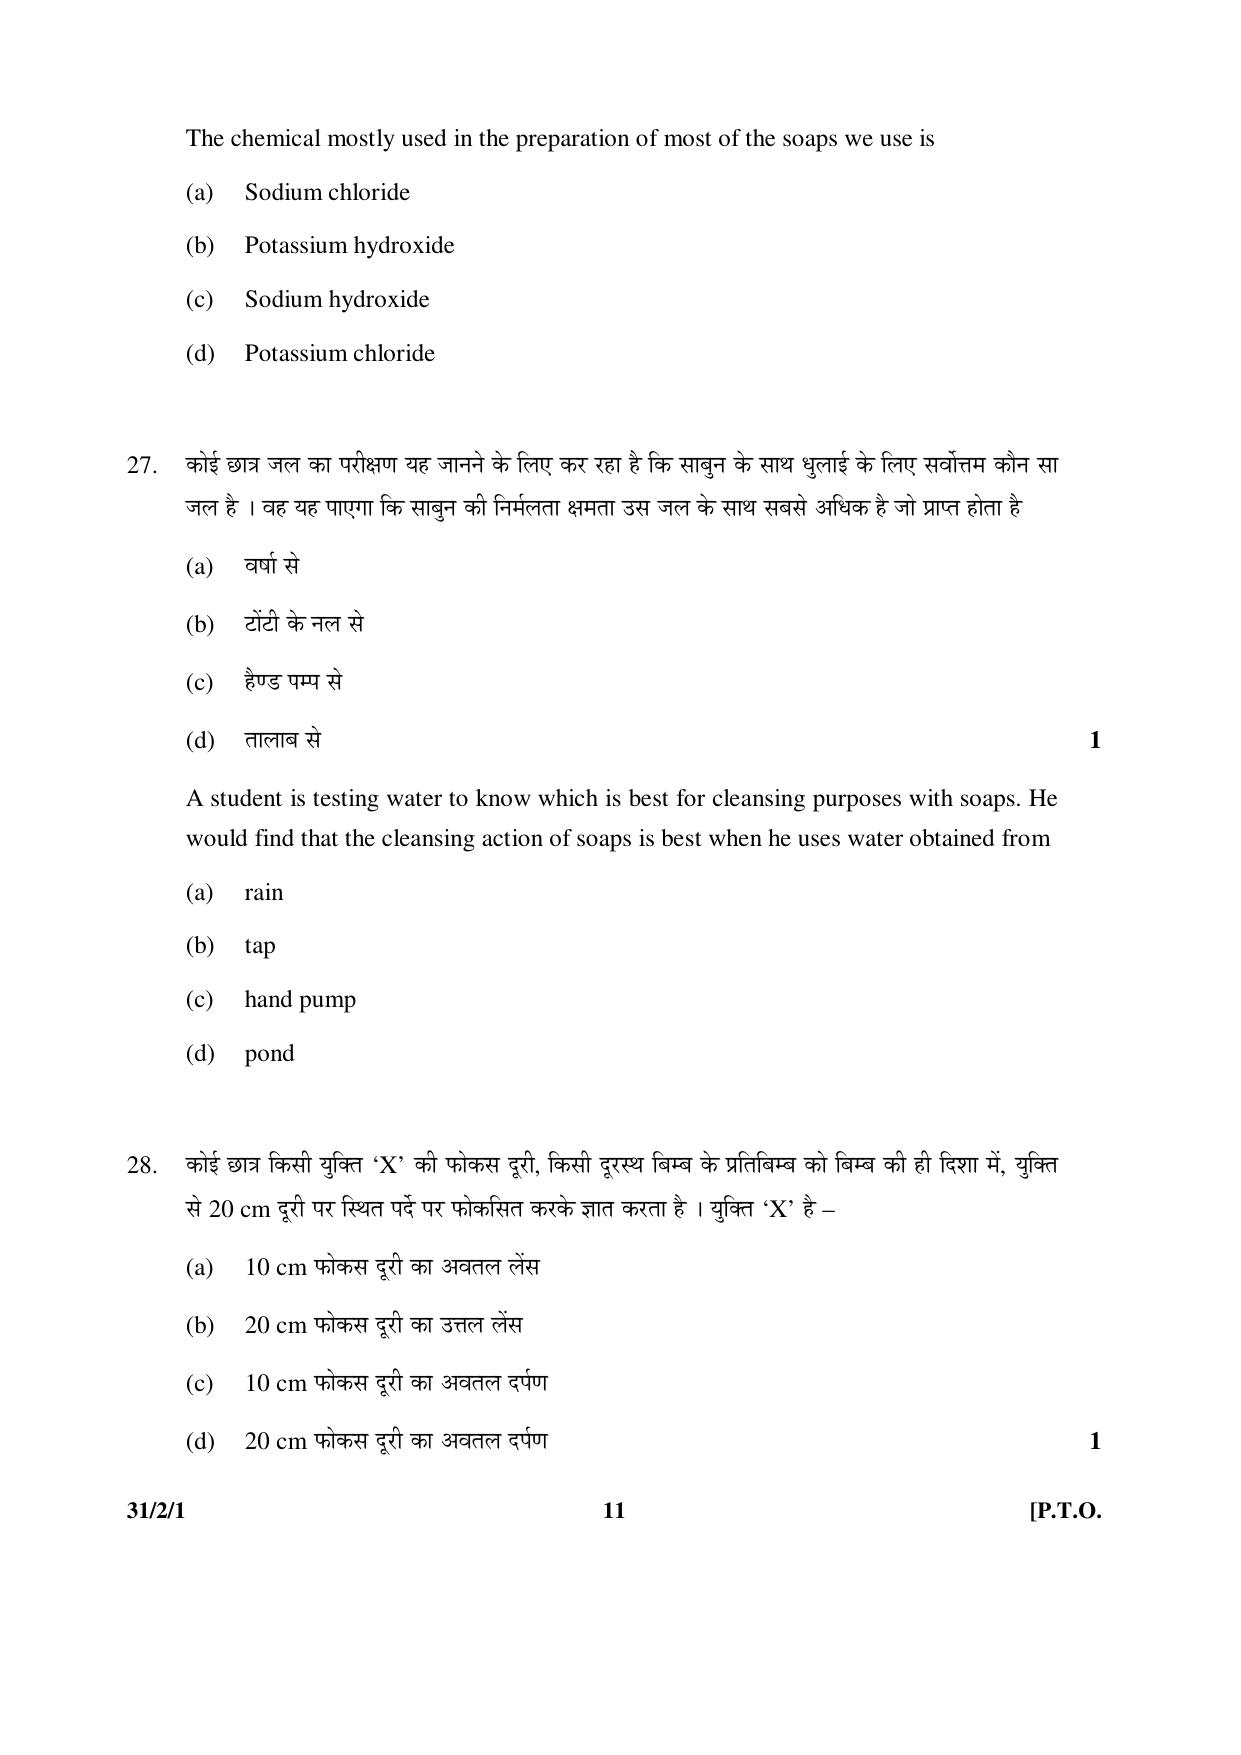 CBSE Class 10 31-2-1 _Science 2016 Question Paper - Page 11